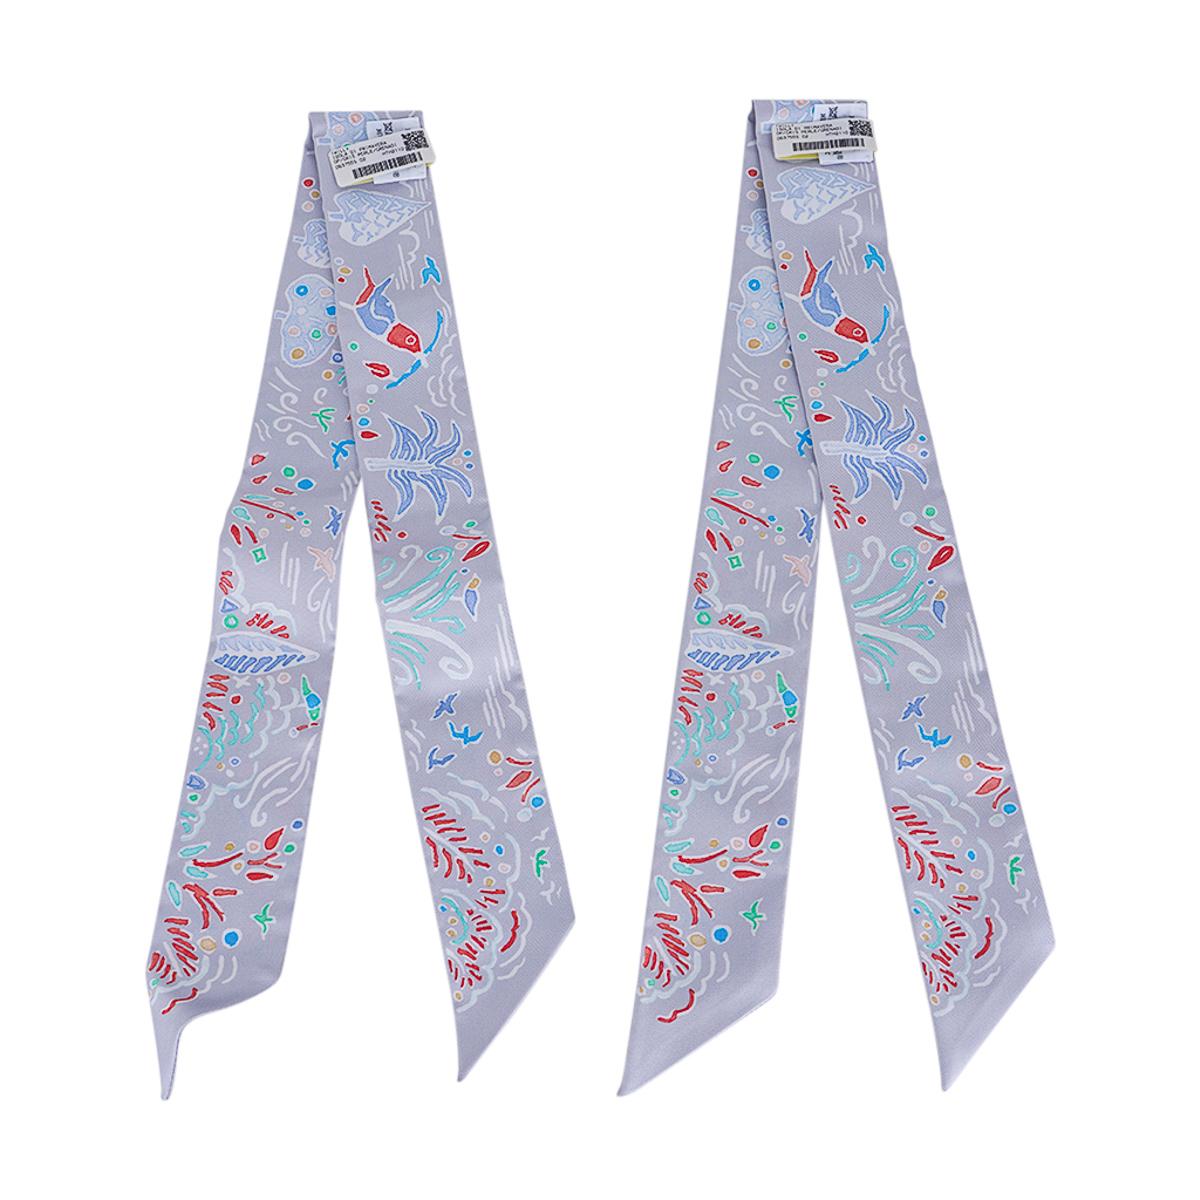 Hermes Twilly Isola di Primavera Gris Perle / Grenadine Silk Scarf Set of Two 2